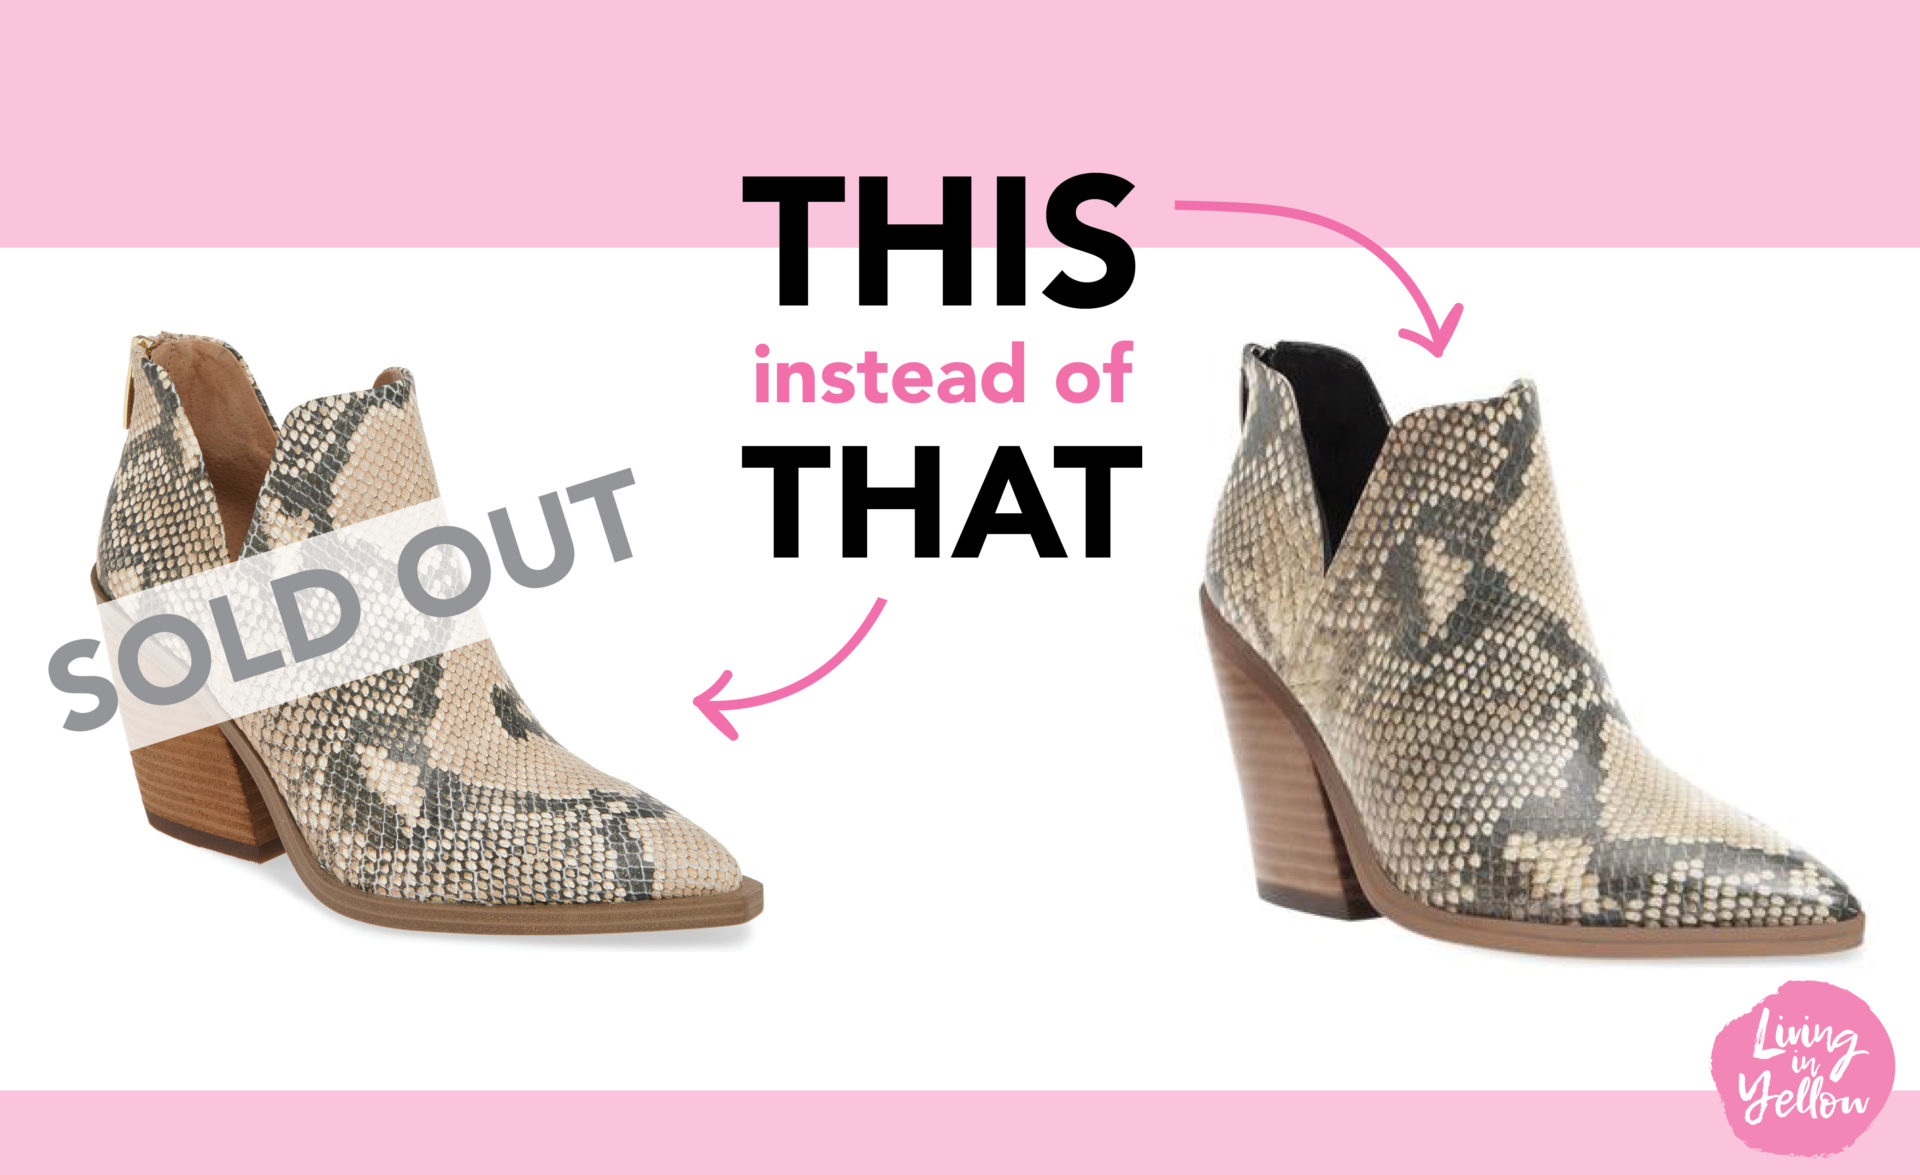 fearless snakeskin booties \u003e Up to 61 